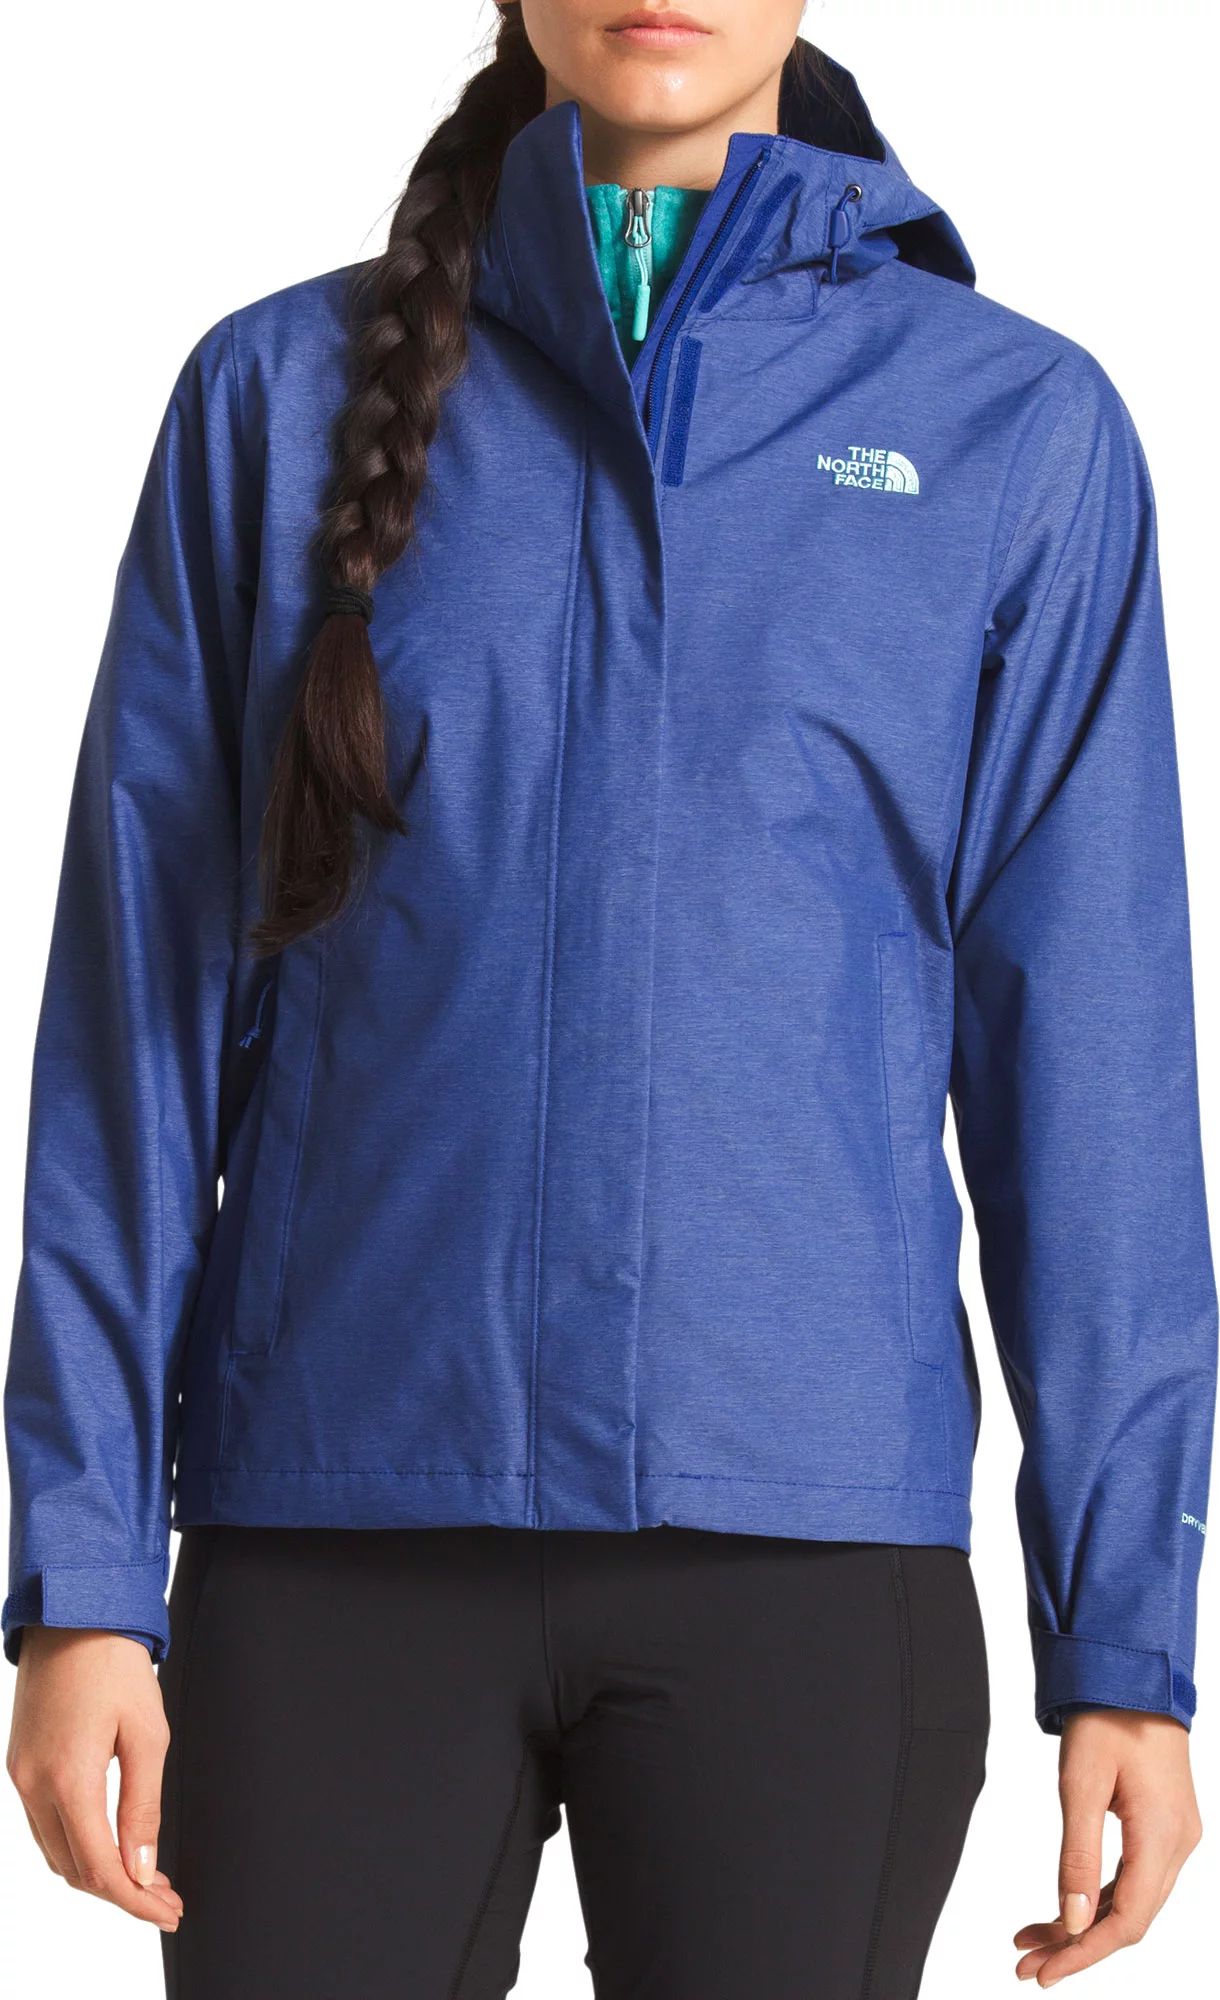 The North Face Women's Venture 2 Jacket, Size: XS, Blue | Dick's Sporting Goods